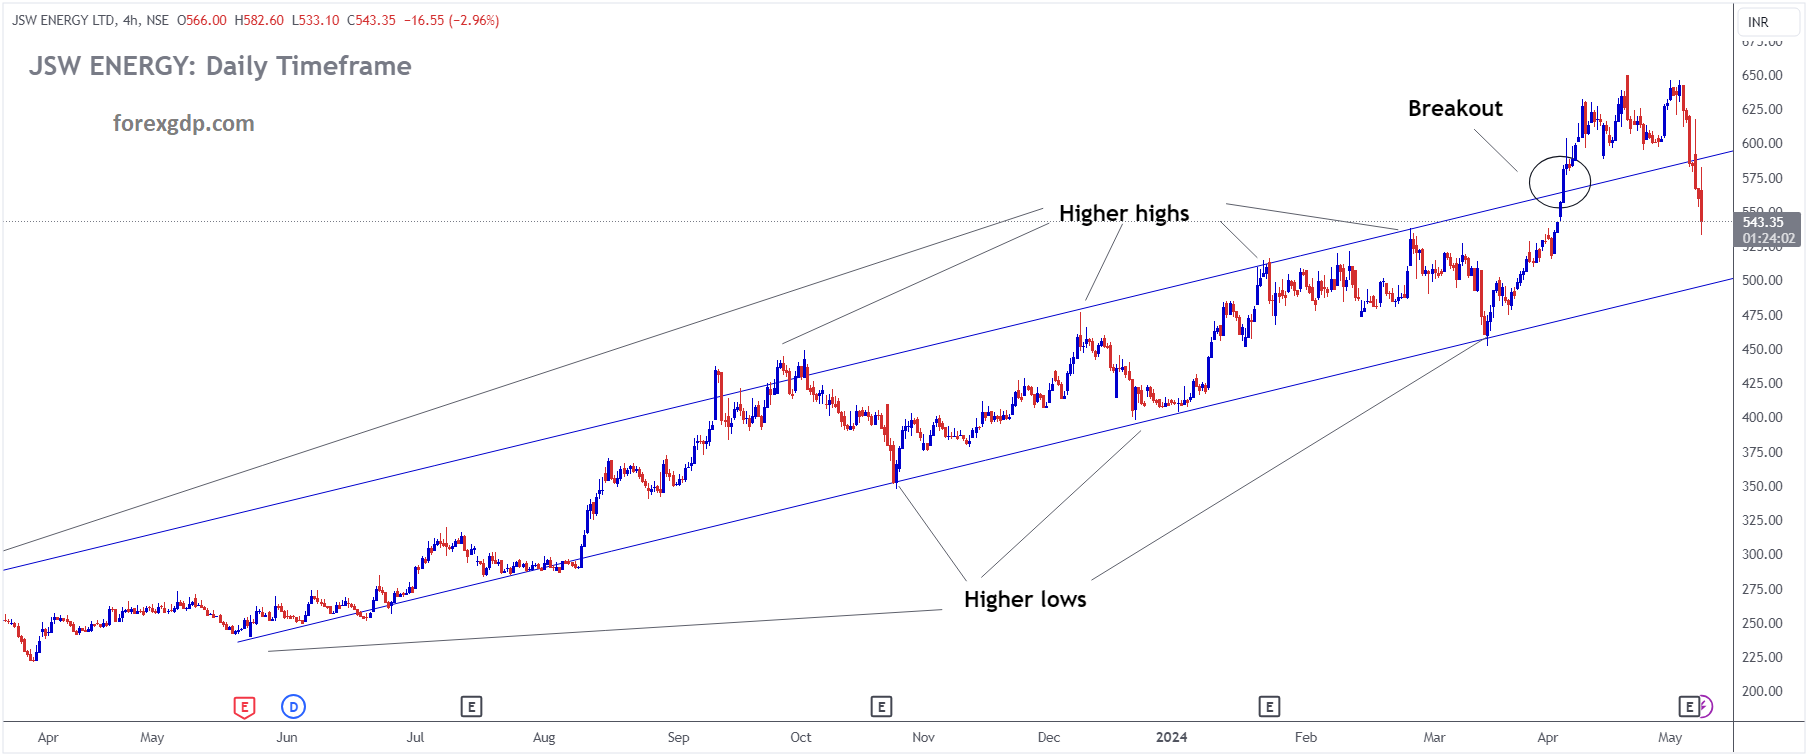 JSW ENERGY is moving in Ascending channel and market has fallen from the higher high area of the channel